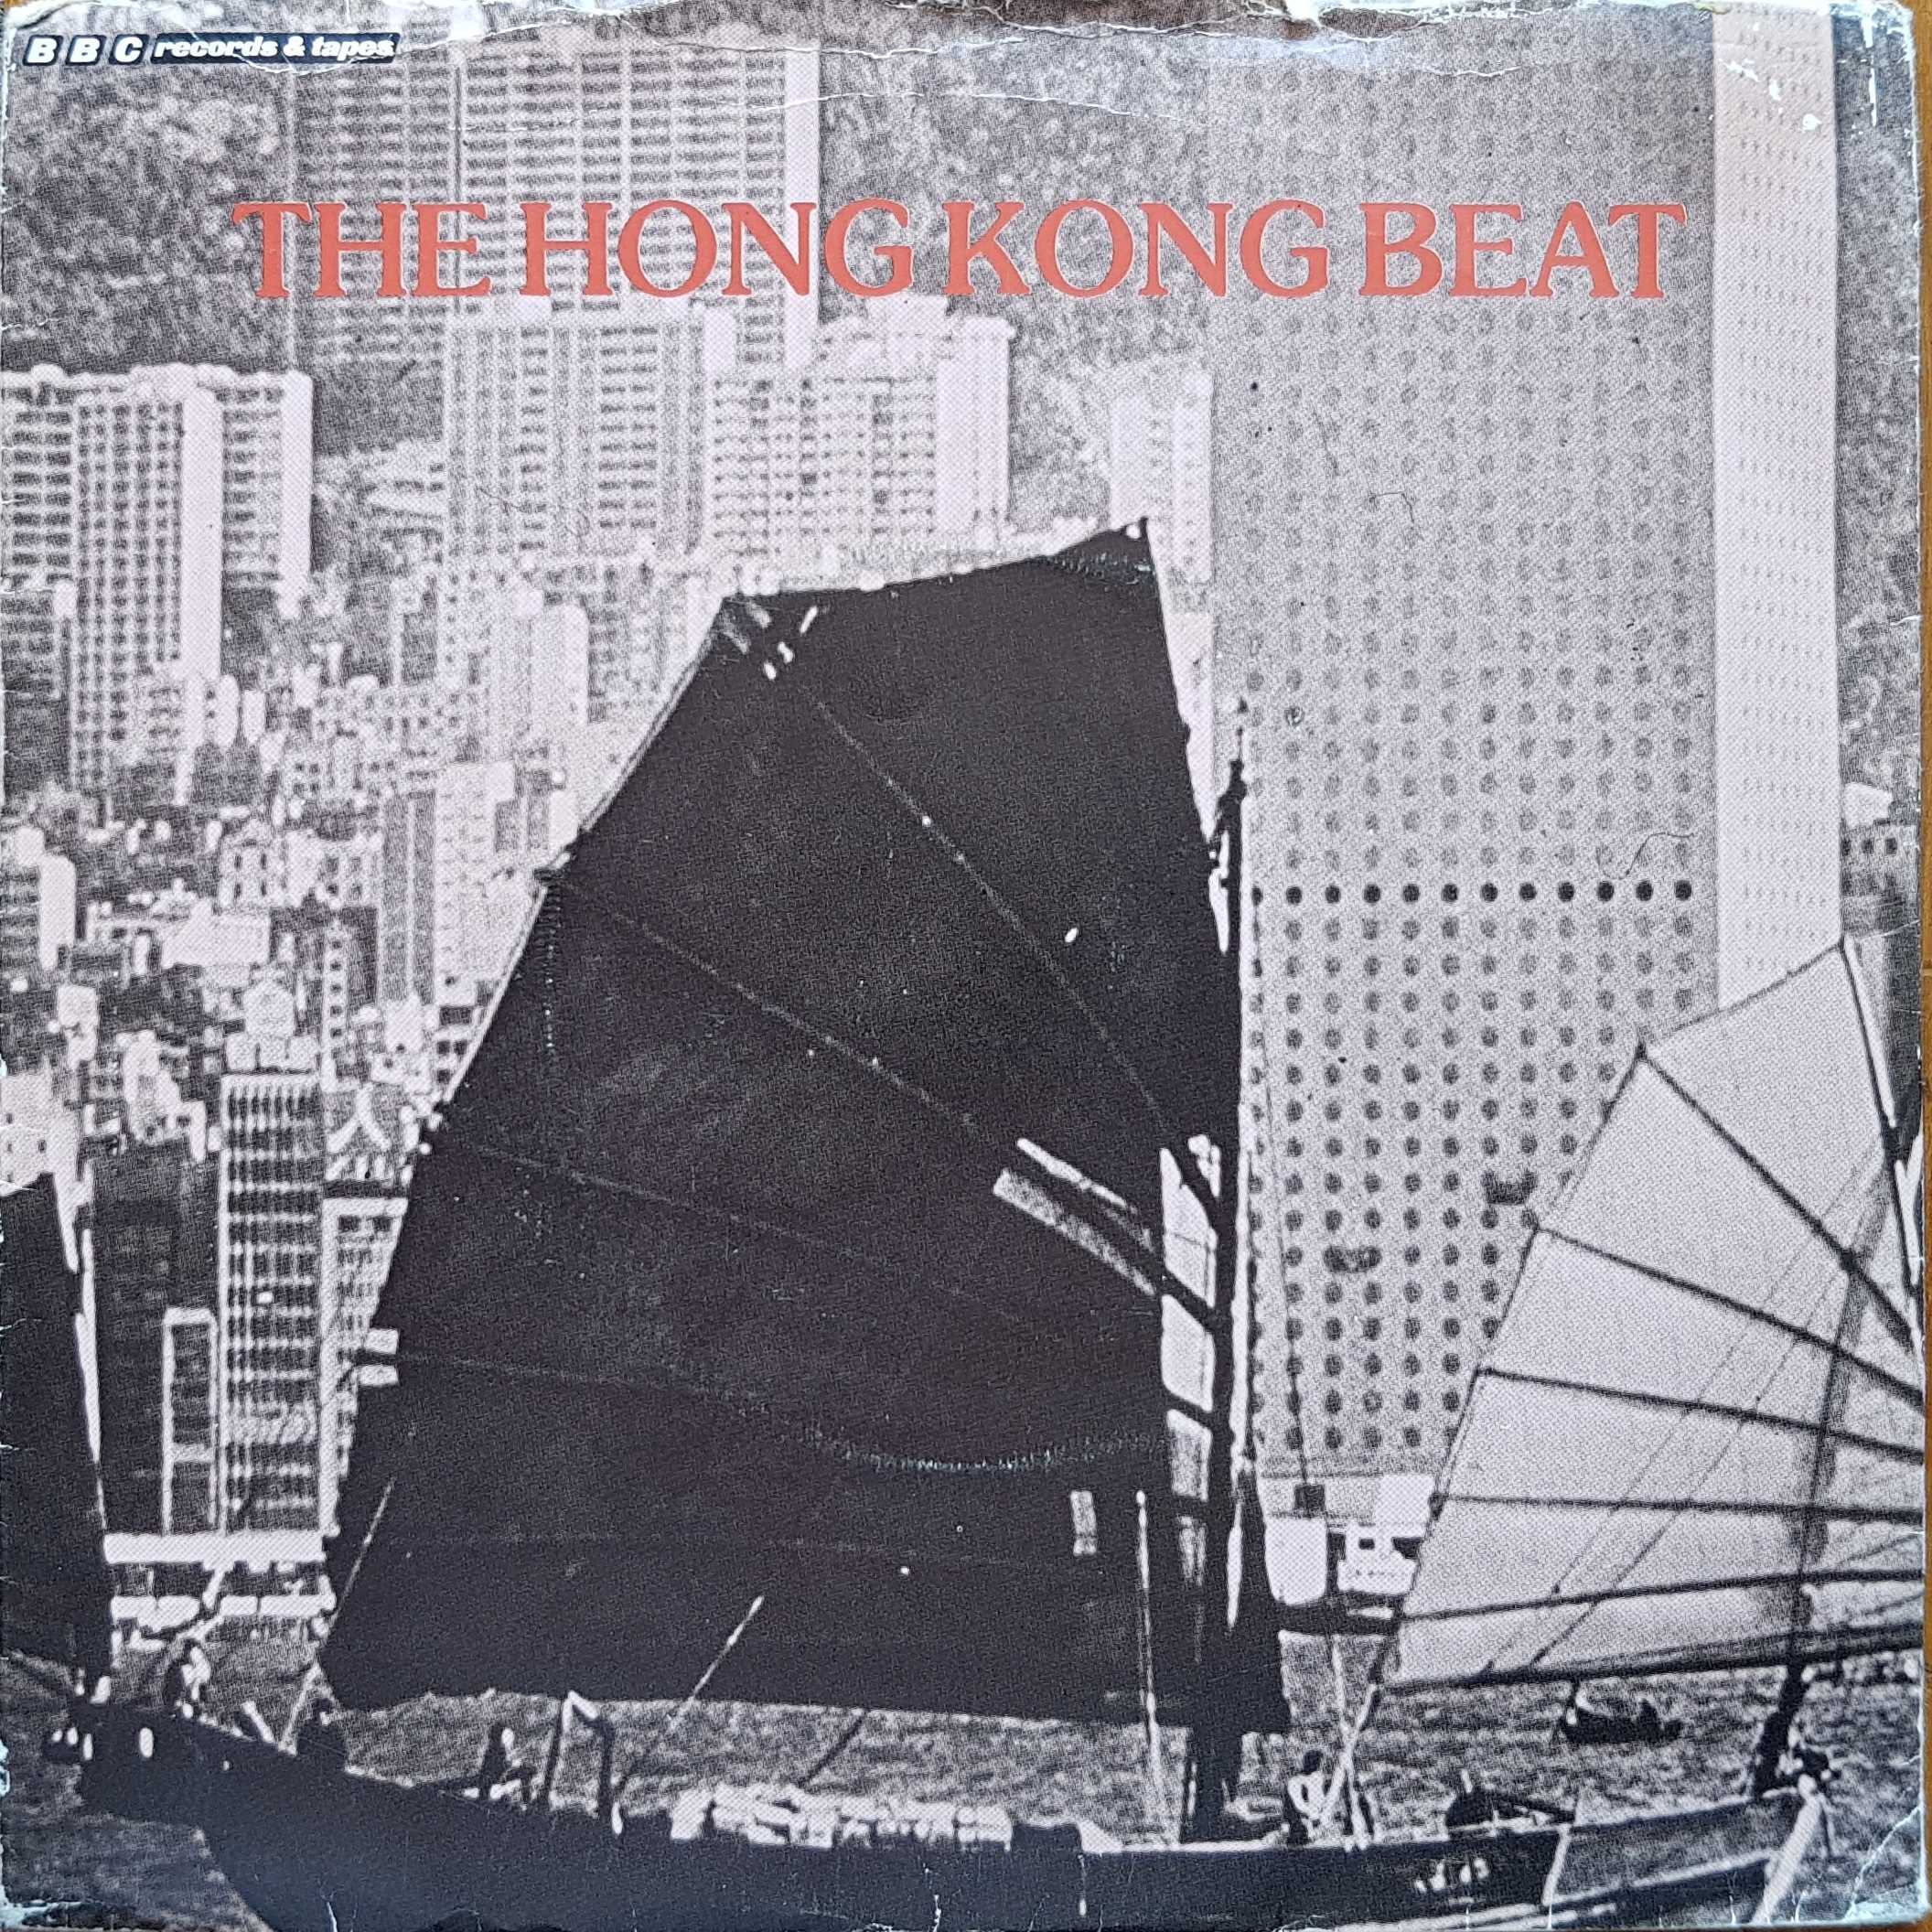 Picture of RESL 52 The Hong Kong beat single by artist Richard Denton / Martin Cook from the BBC records and Tapes library